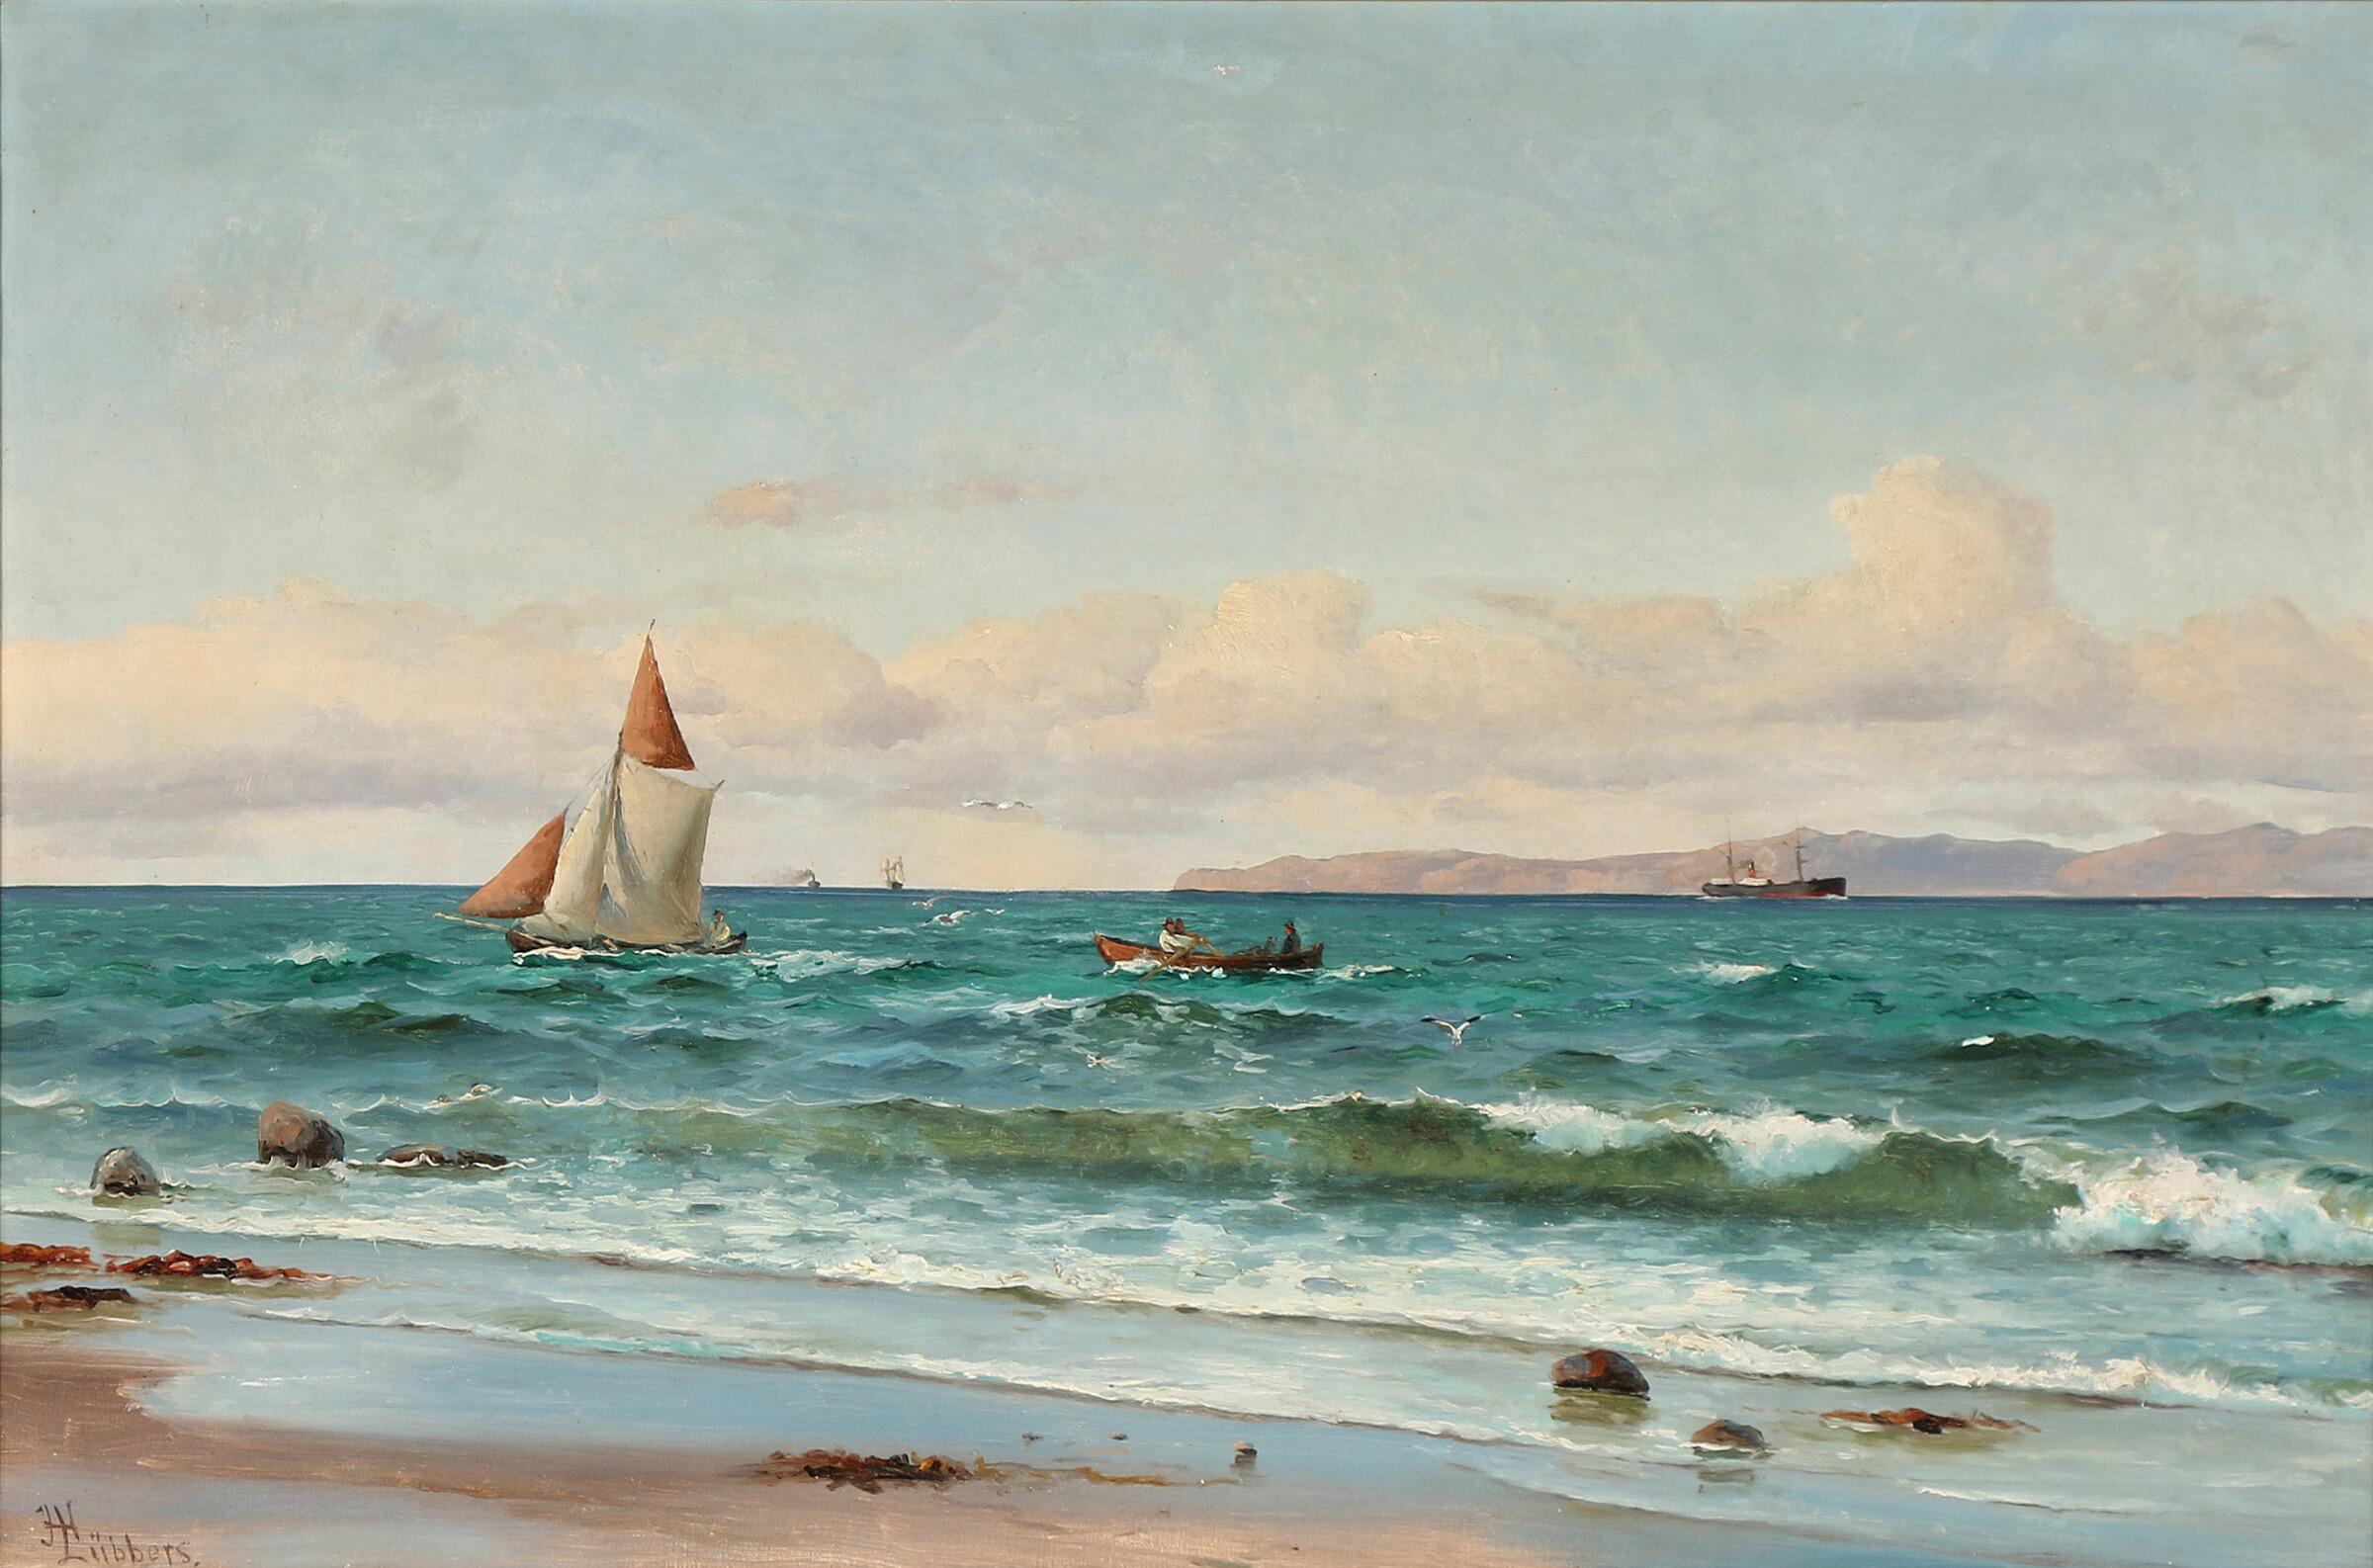 Holger Lübbers, Danish artist, Copenhagen 1850-1931. Holger Lubbers mostly concentrated his fine marine landscapes on Copenhagen harbor and the North Coast of Sjaelland. This painting features the coast off Hornbæk with Kullen in the distance.